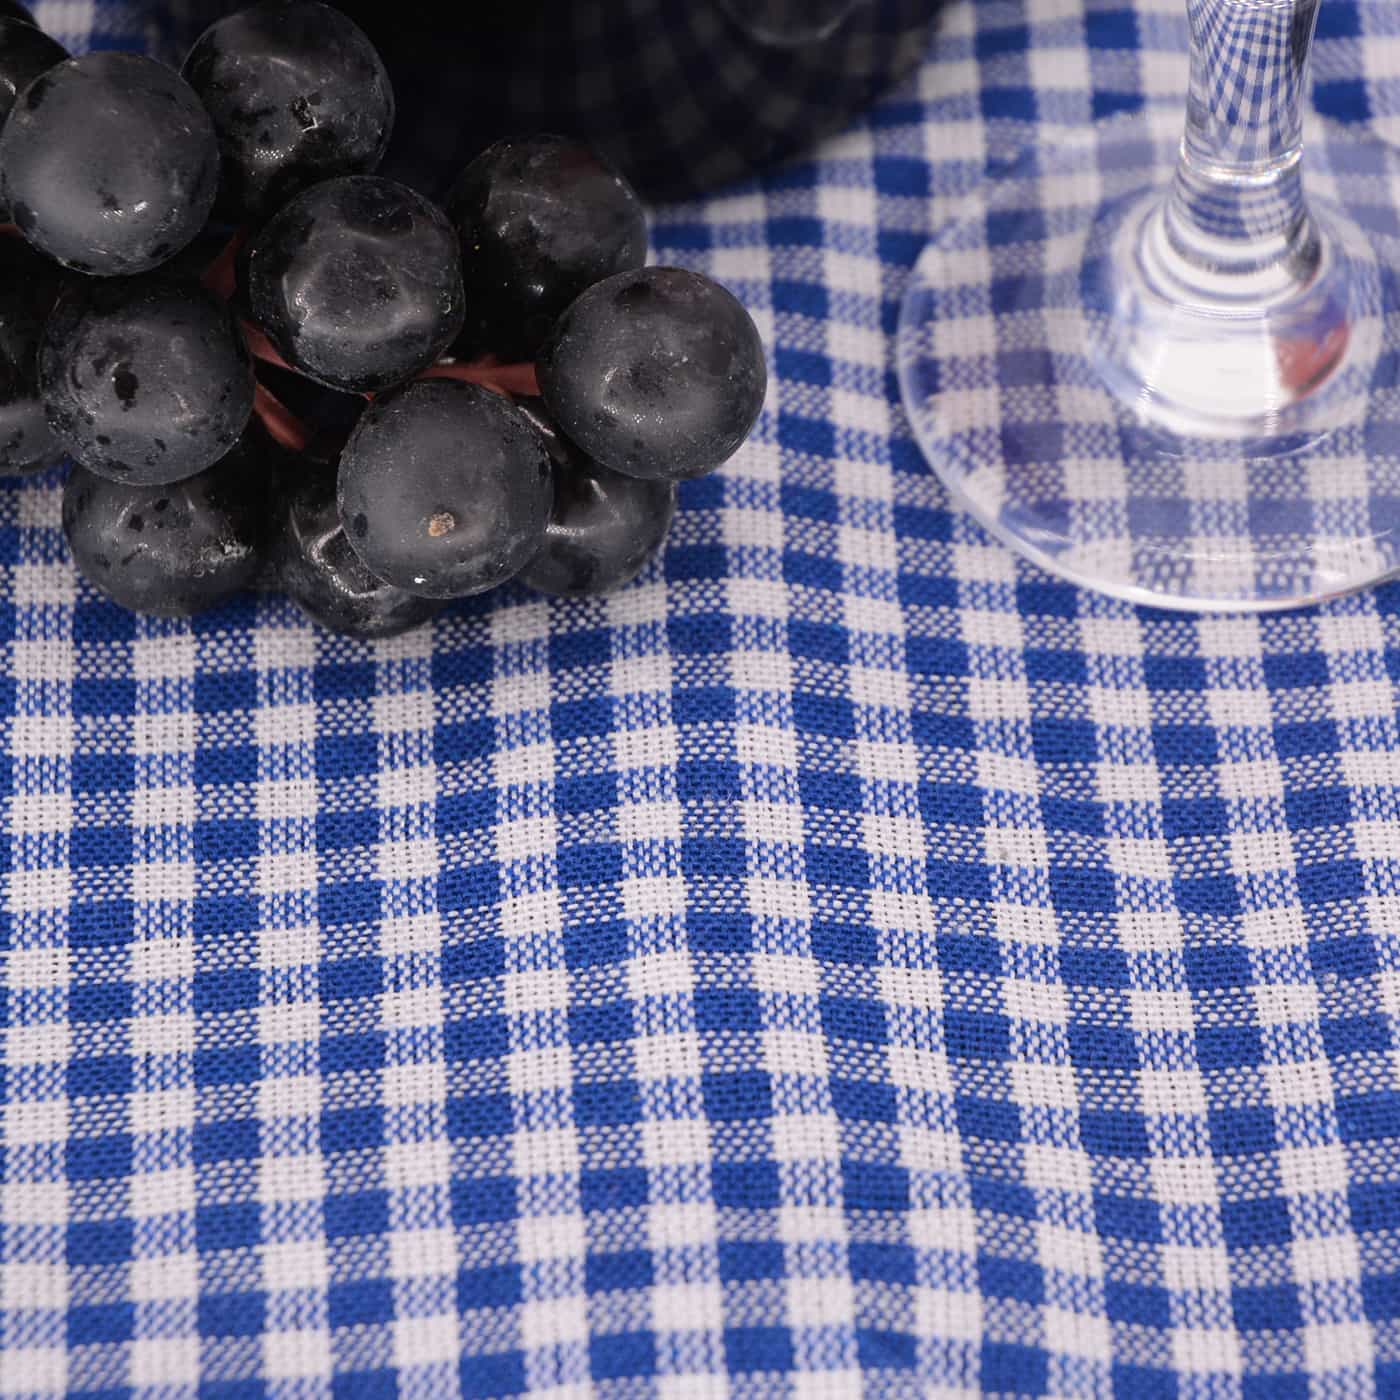 Waterproof picnic blanket blue and white gingham XL